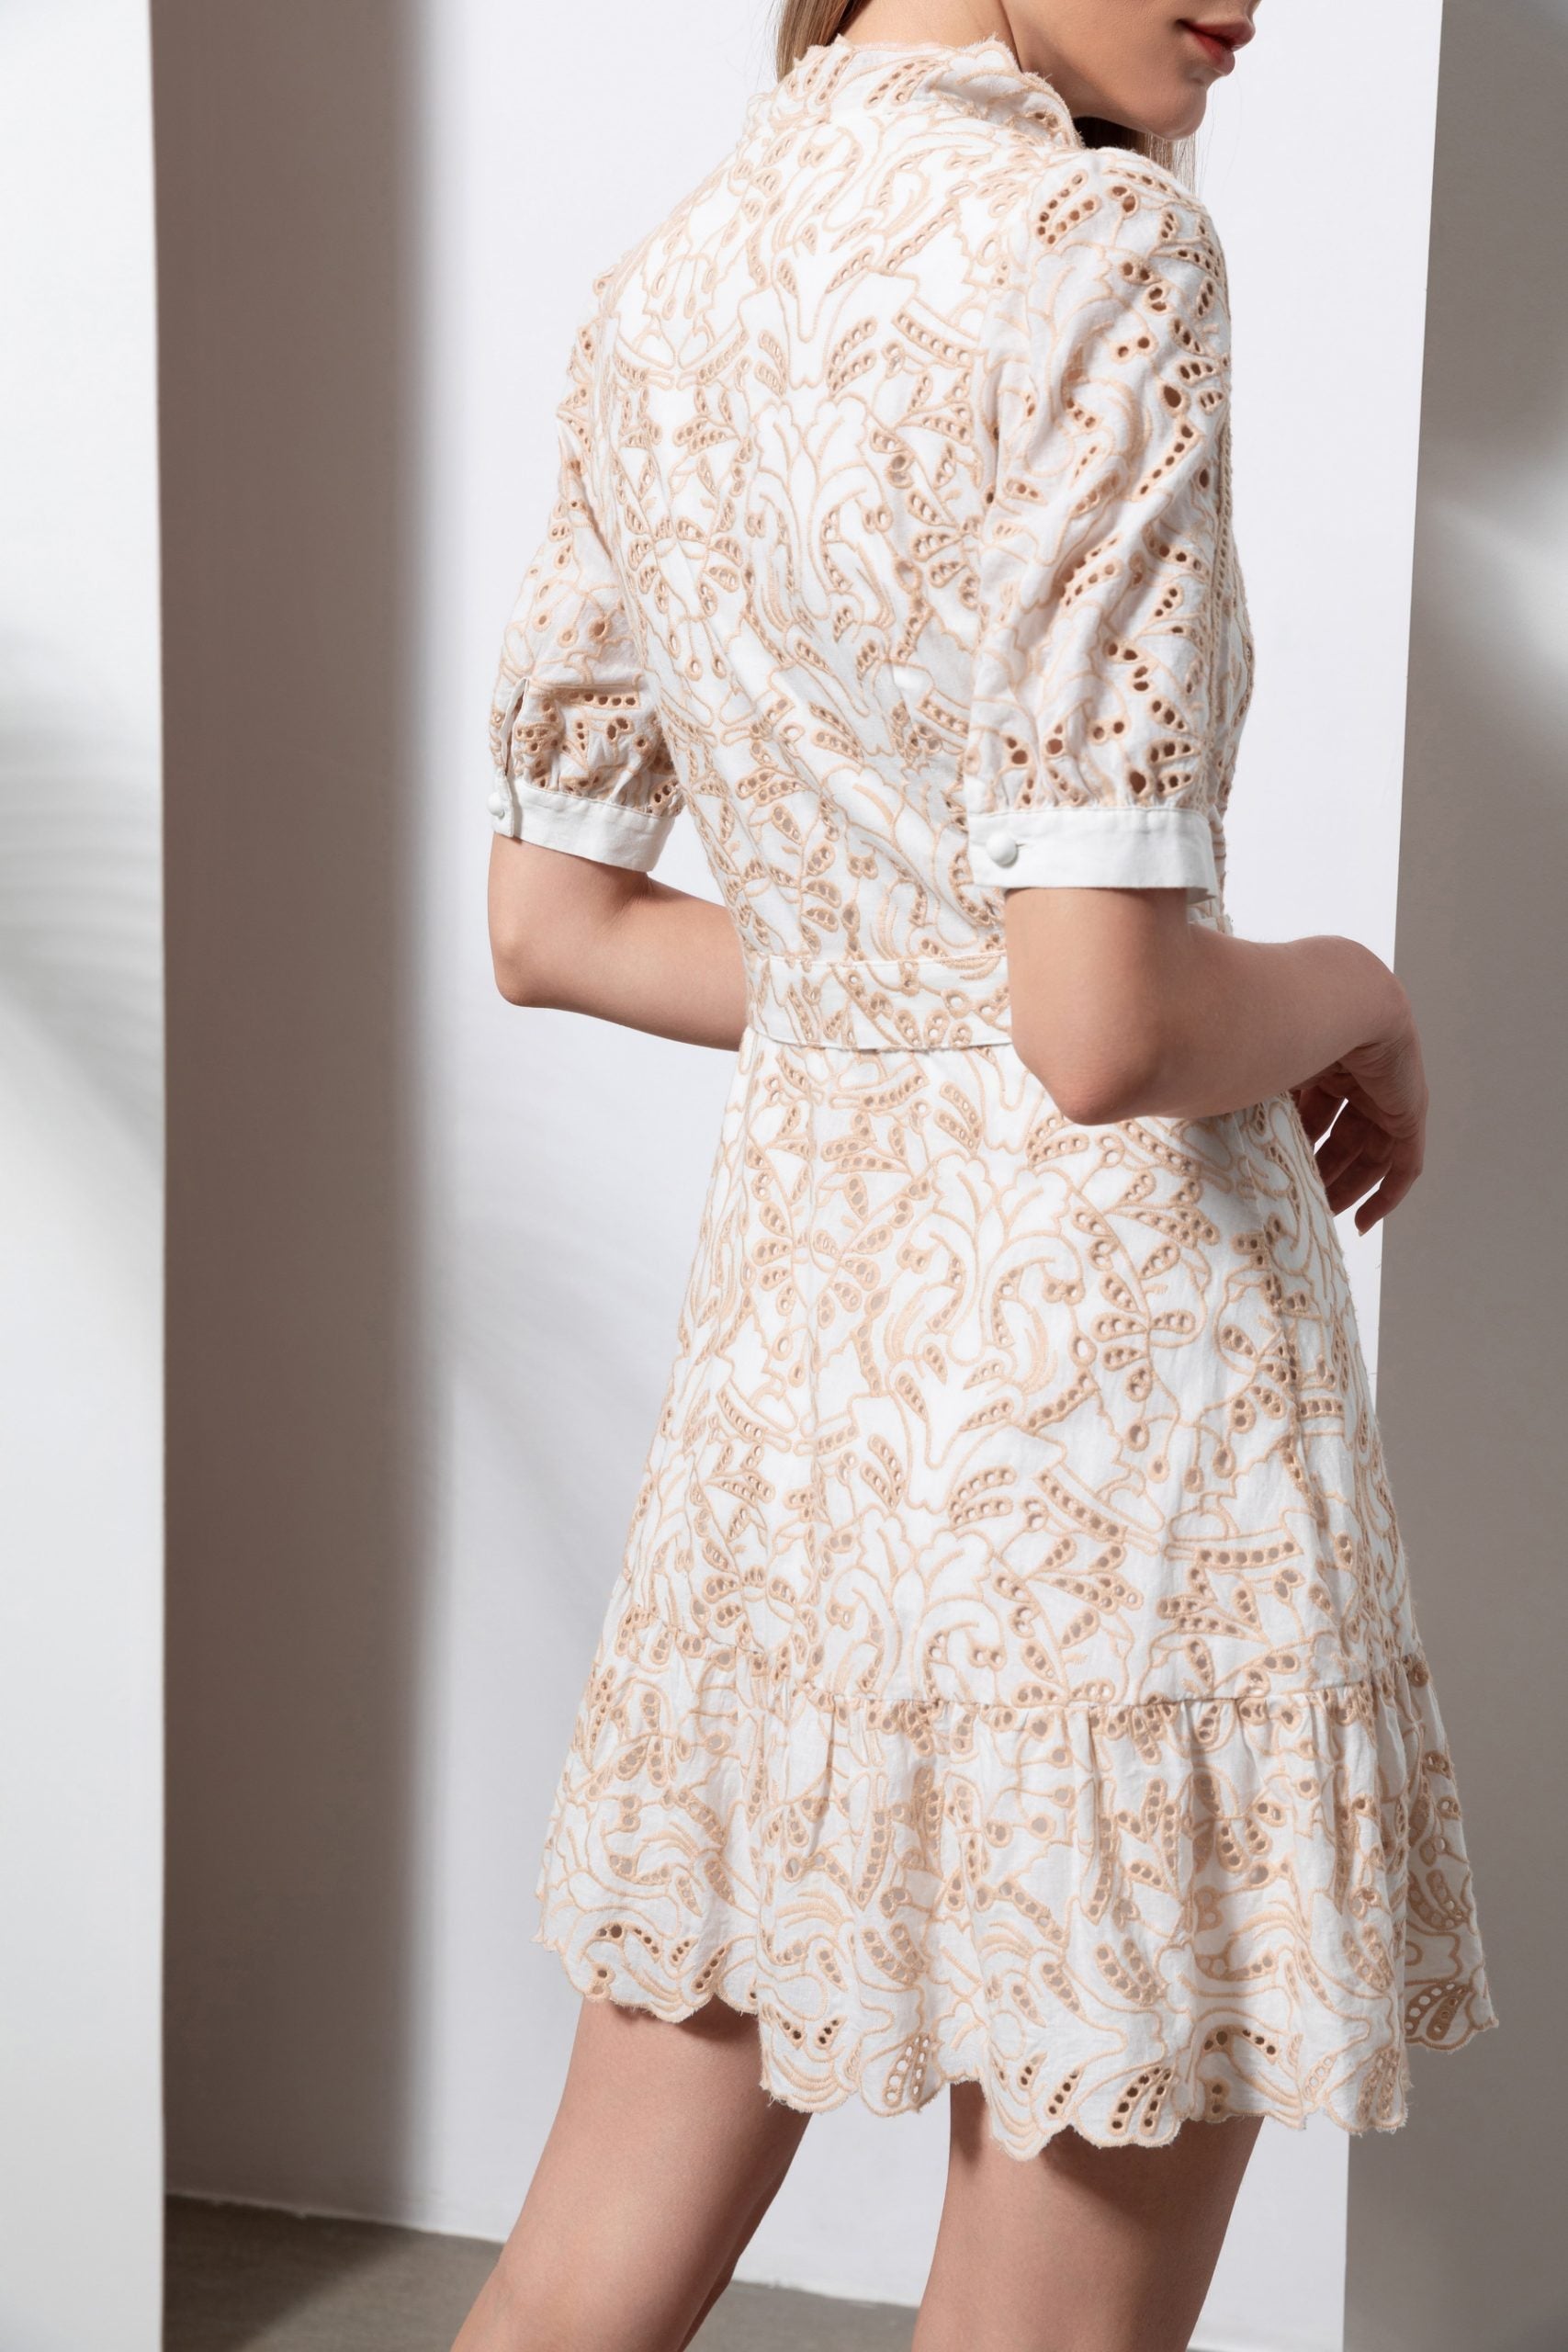 Elevate your style with our embroidered cotton white dress. Effortlessly chic and irresistibly elegant. Shop now!